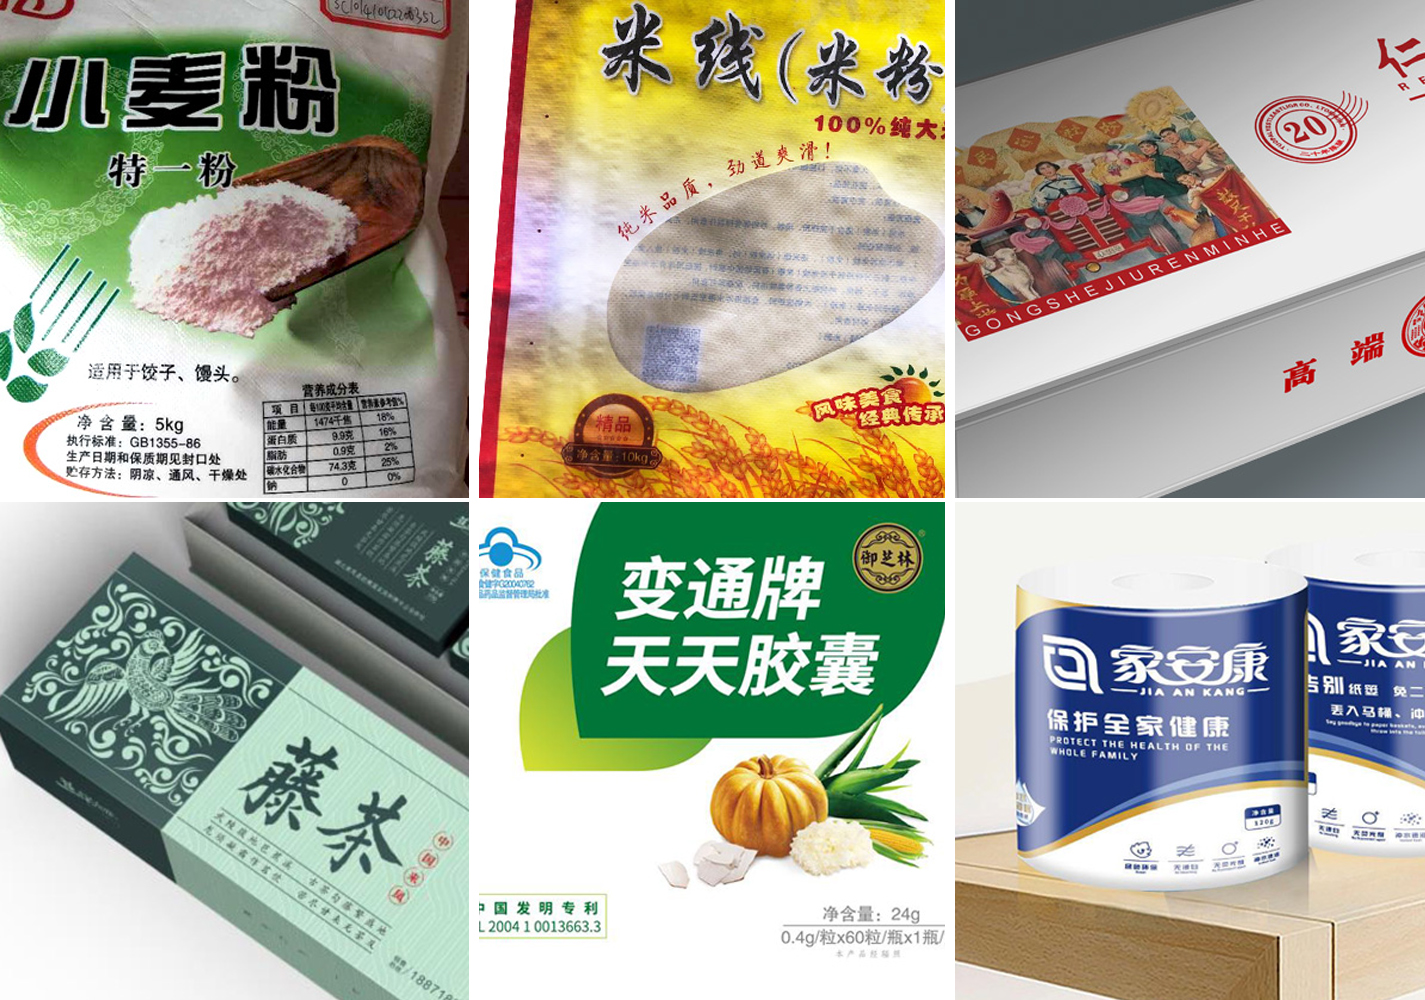 Food (Product) Safety Traceability Platform in Shunde District, China sets example of food industry supervision by government to ensure food safety